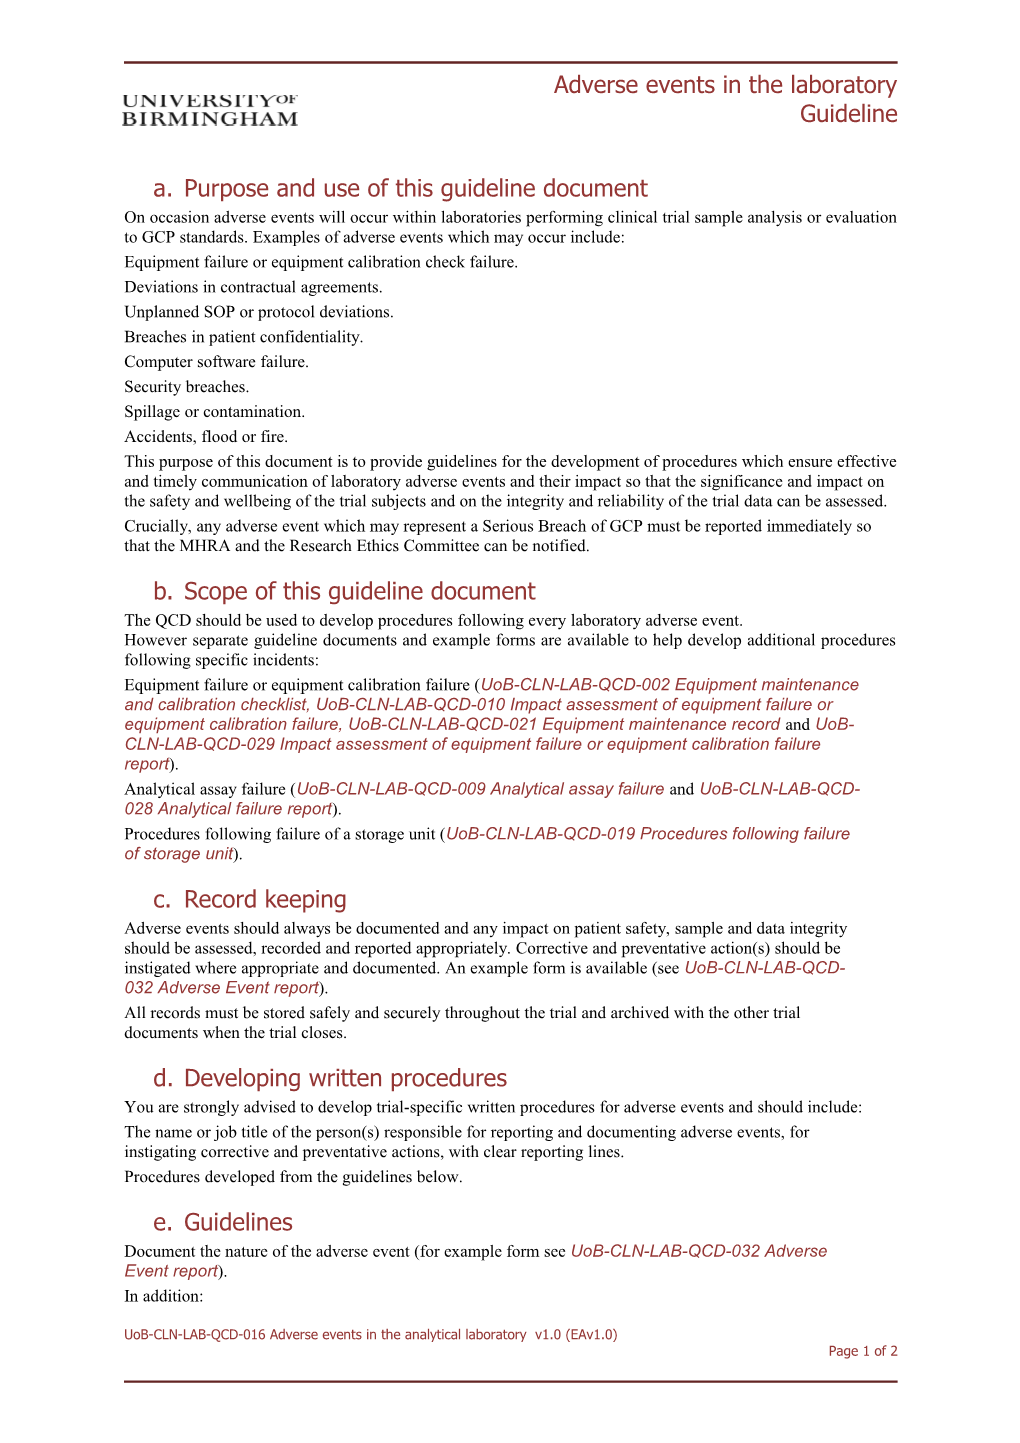 Purpose and Use of This Guideline Document